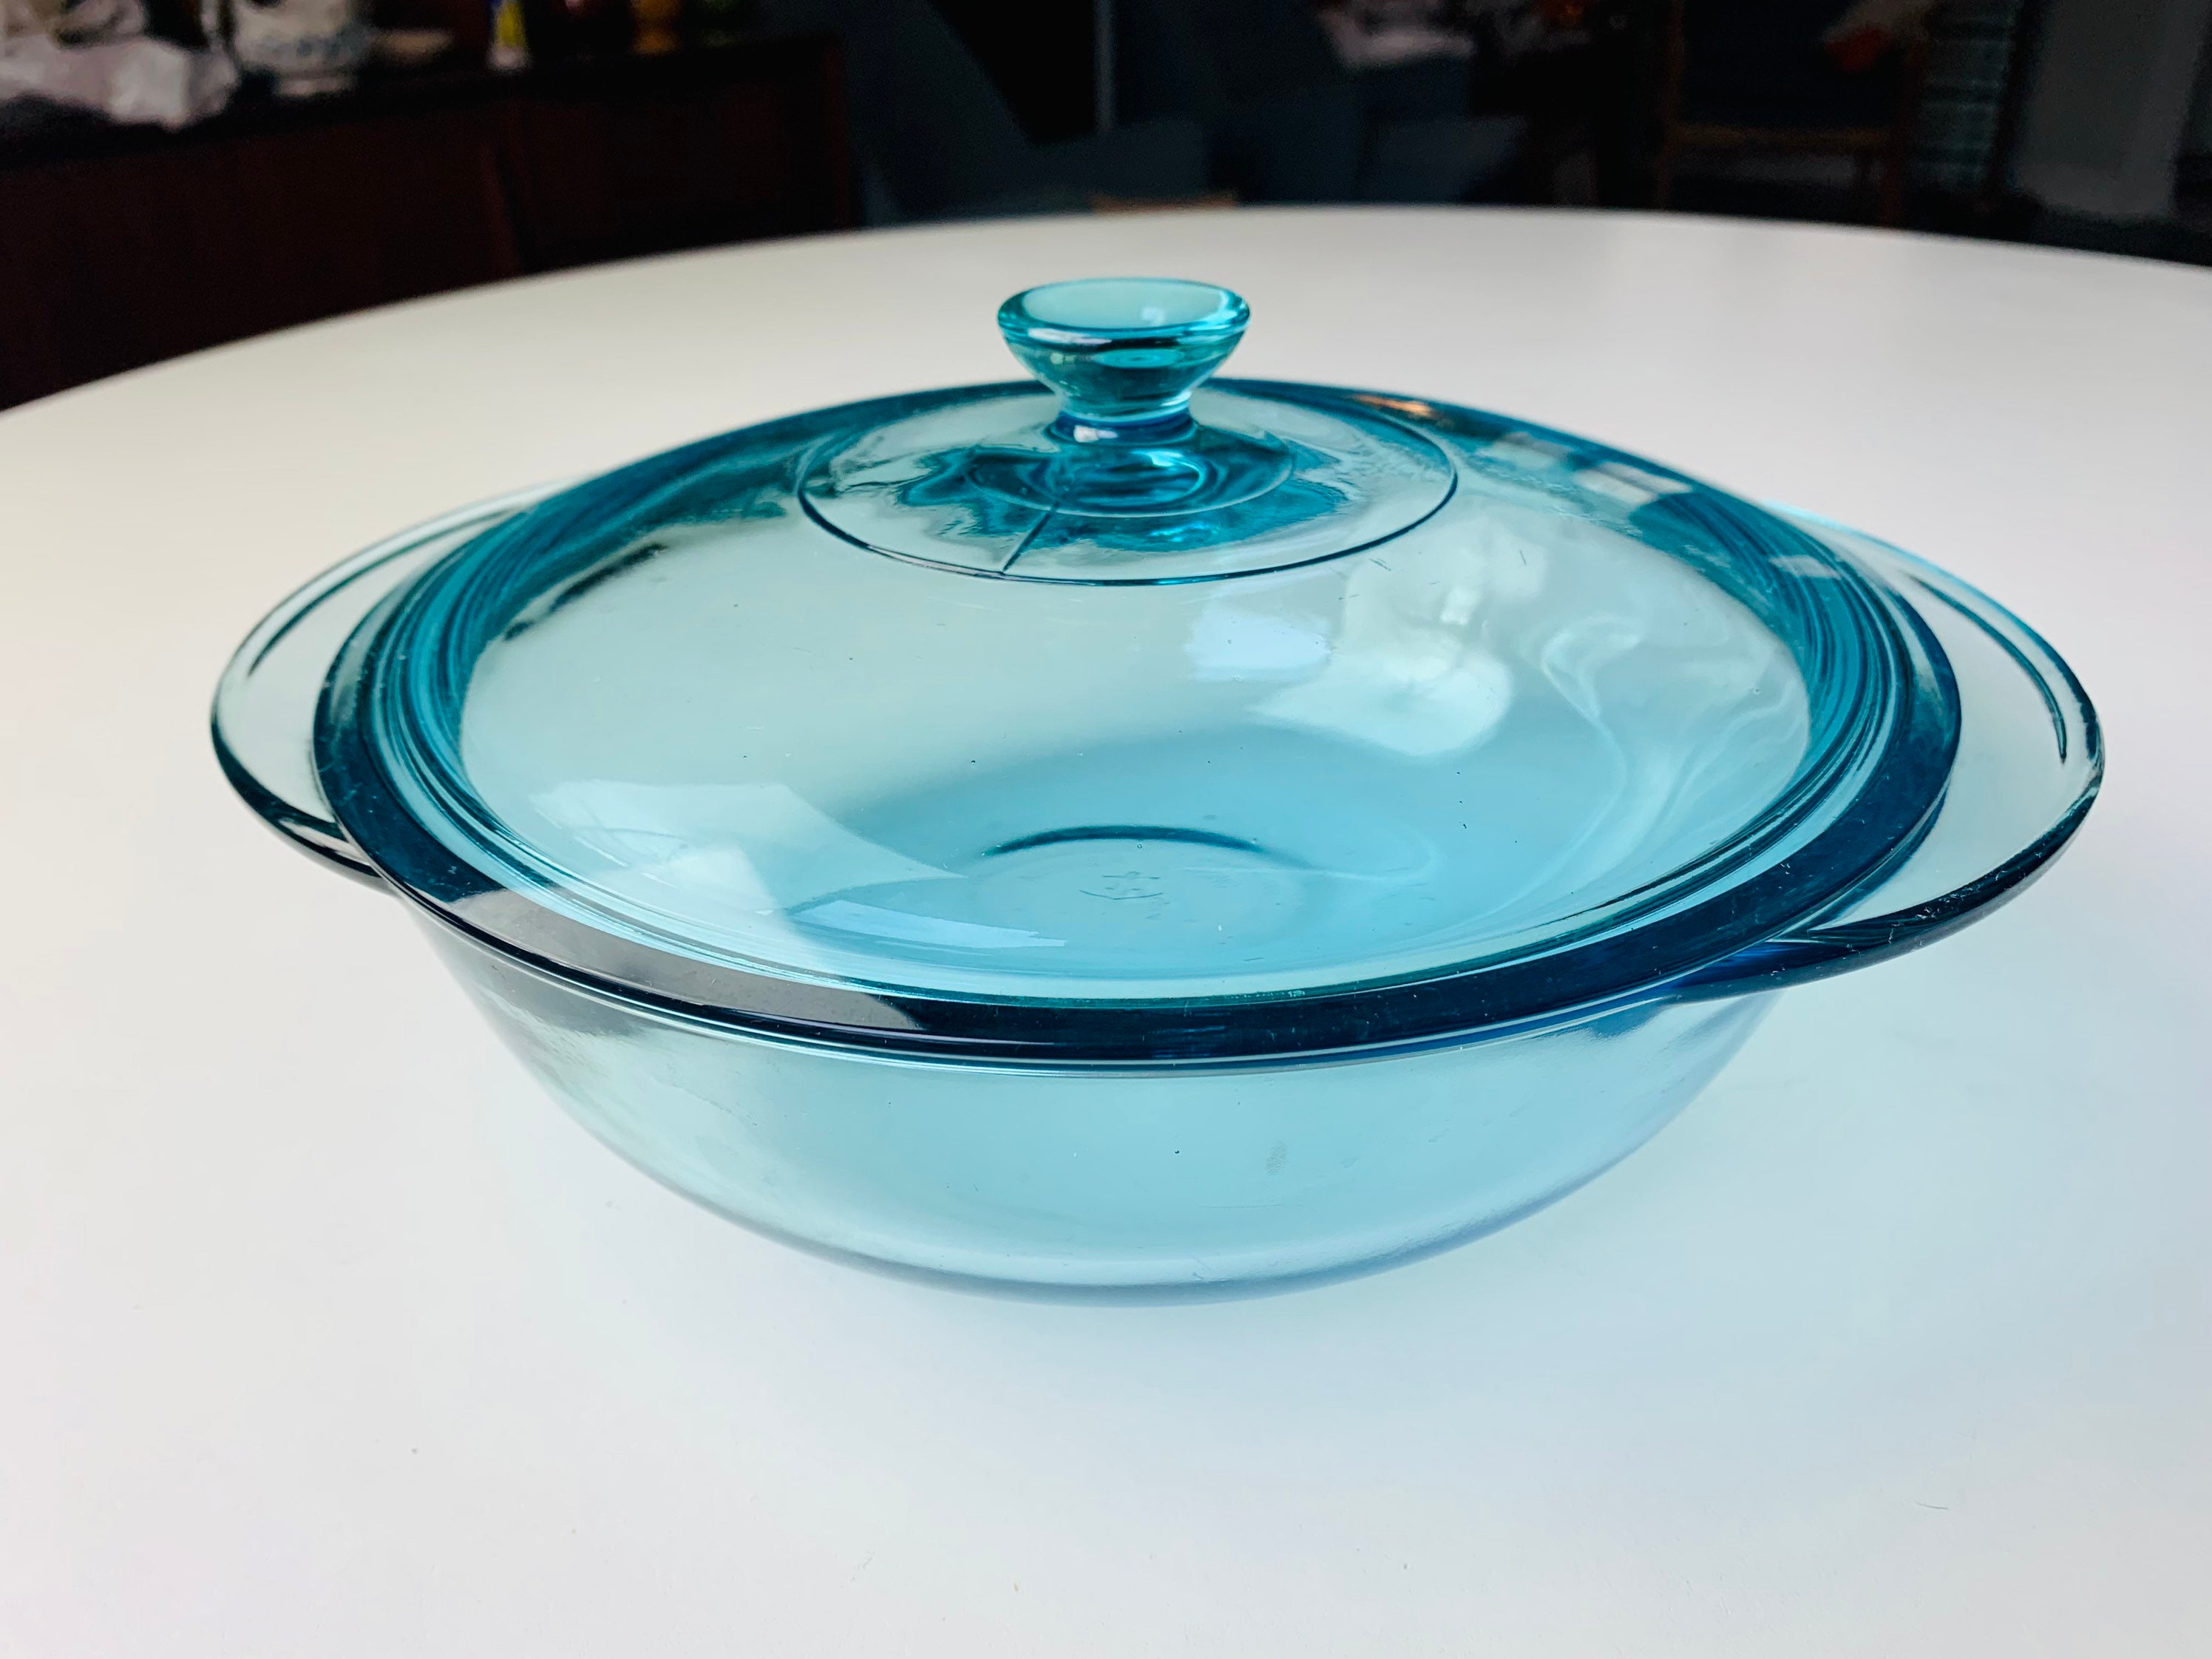 What Is the Difference Between Anchor Hocking and Pyrex Glassware?